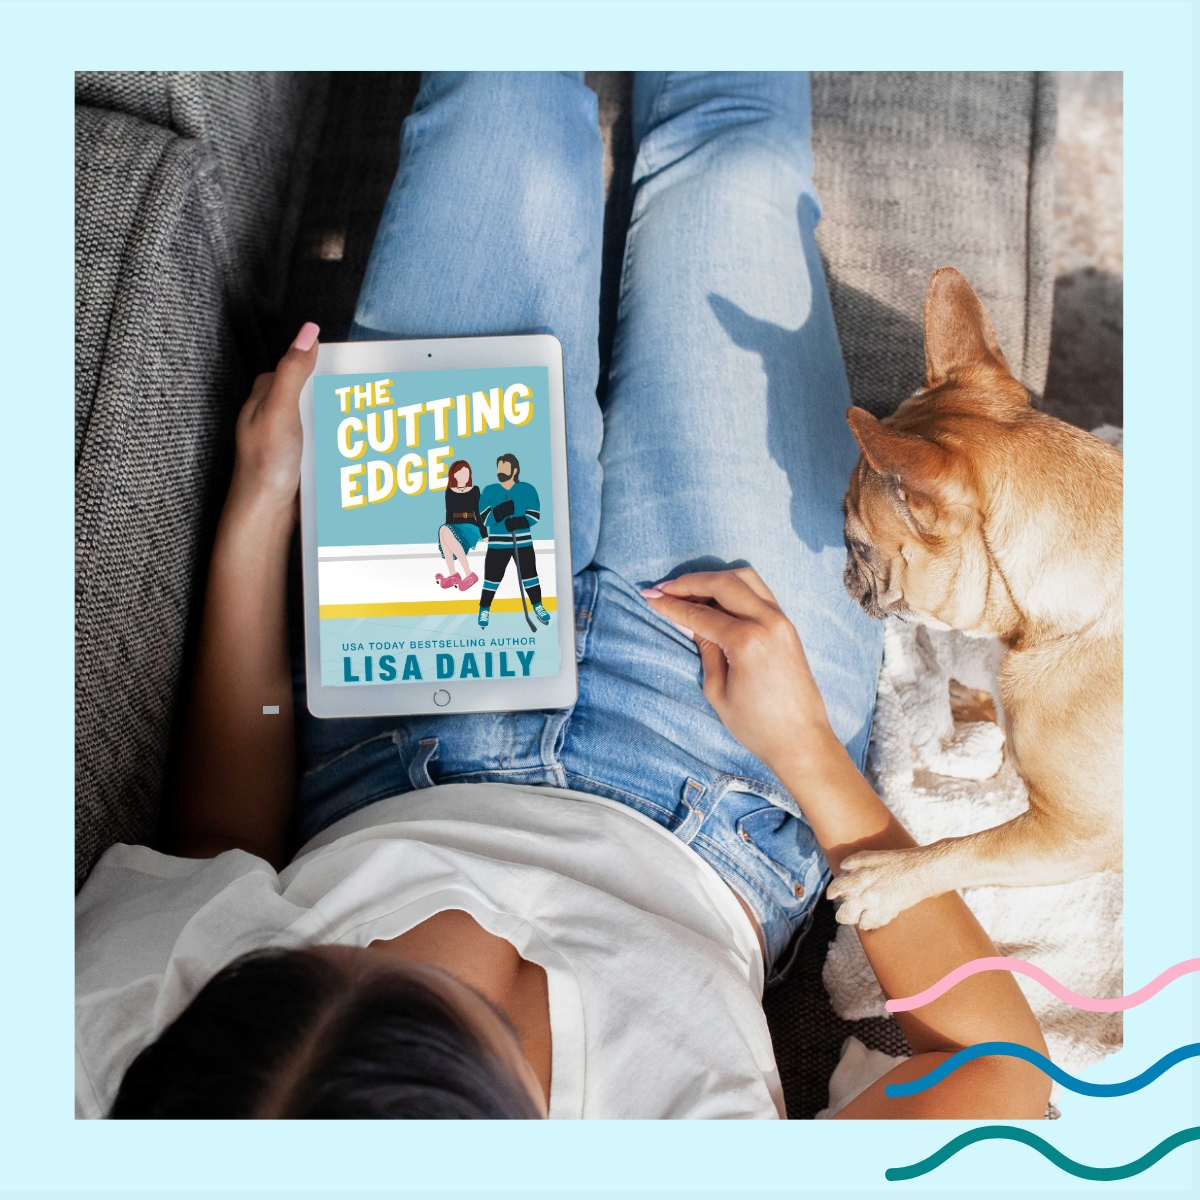 Hey, did you hear my Hockey RomCom is out? 👀

Find it on Amazon or at your favorite bookshop!😇🥰
amazon.com/Cutting-Edge-S…

#SteamyRomance #AmReadingRomance #HockeyRomance #RomCom #SportsRomance #ContemporaryRomance #NewRomCom